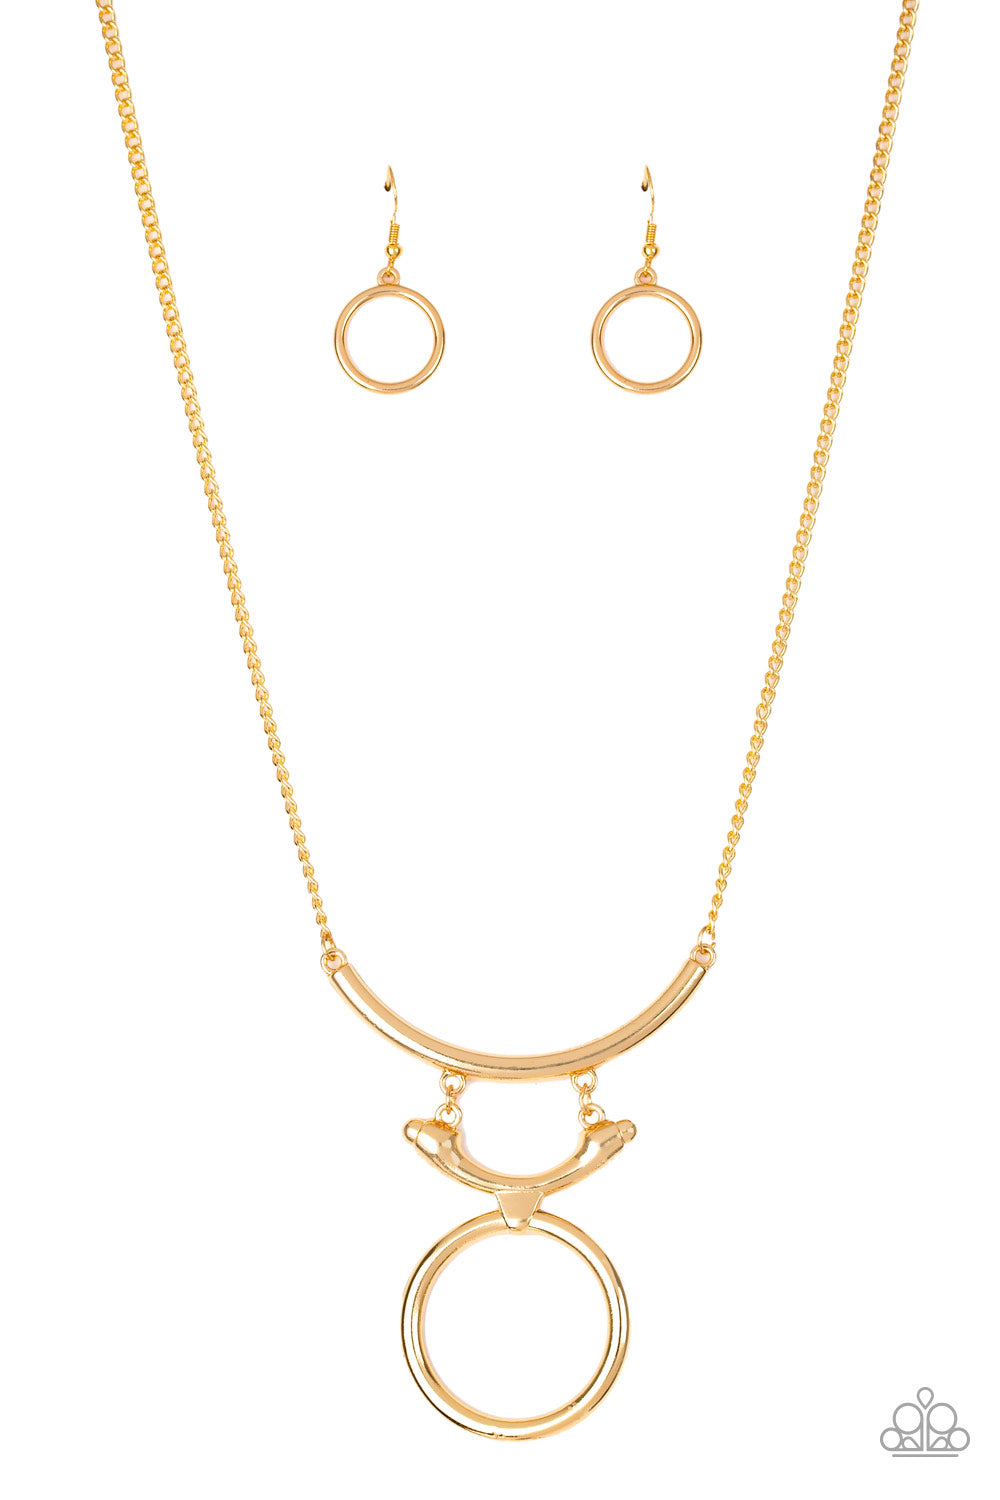 Walk Like An Egyptian Necklace - Gold